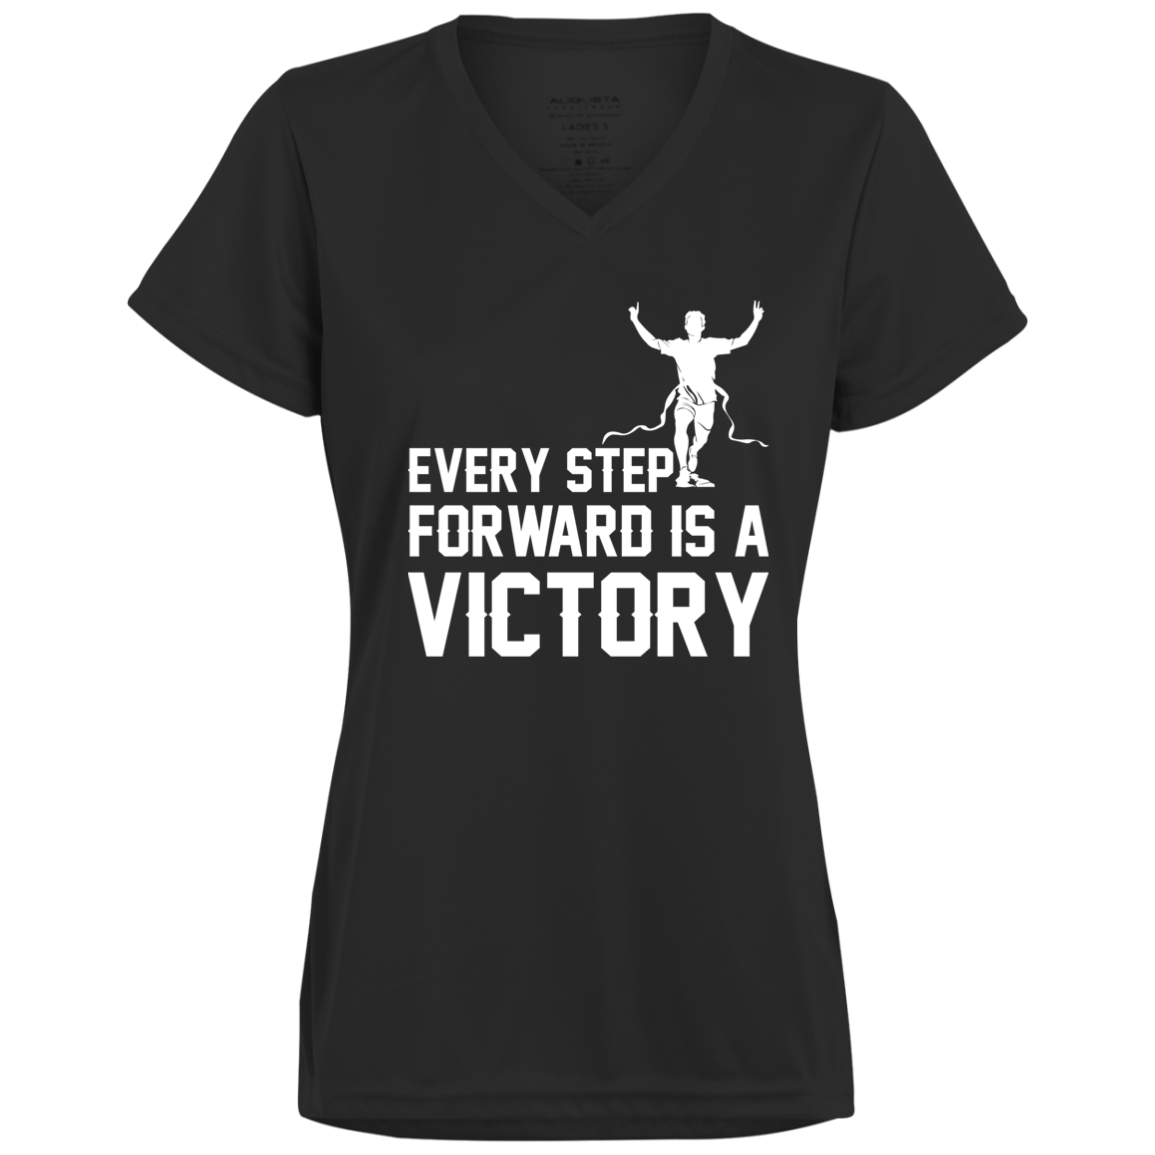 Women's Inspirational Top Every step forward is a victory